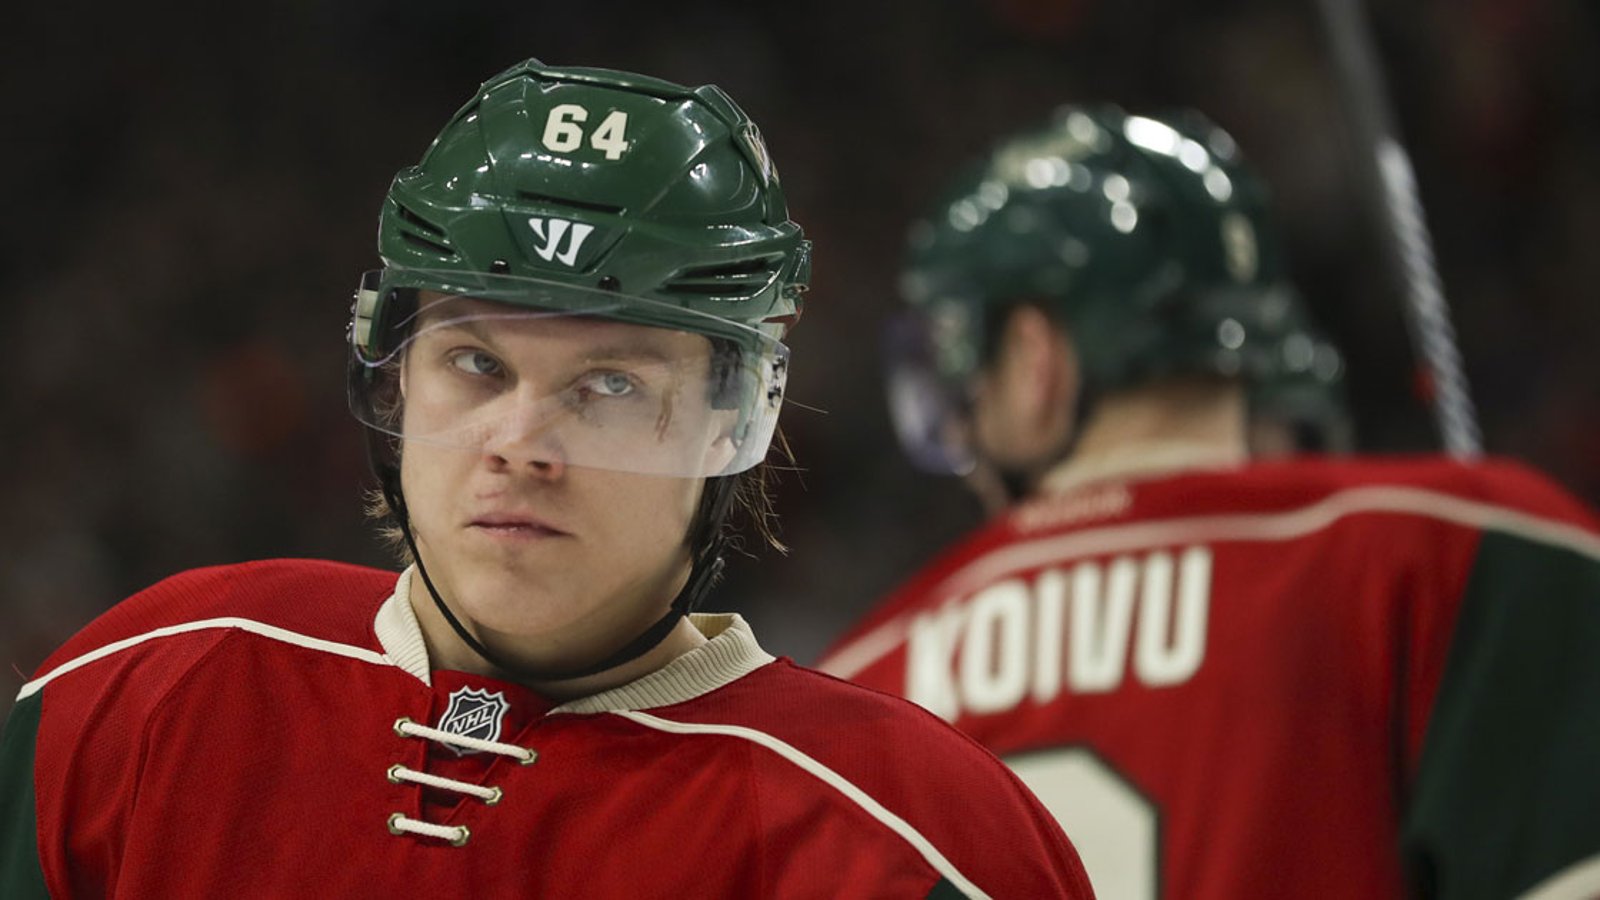 Report: Star player is a possibility for Wild's next game